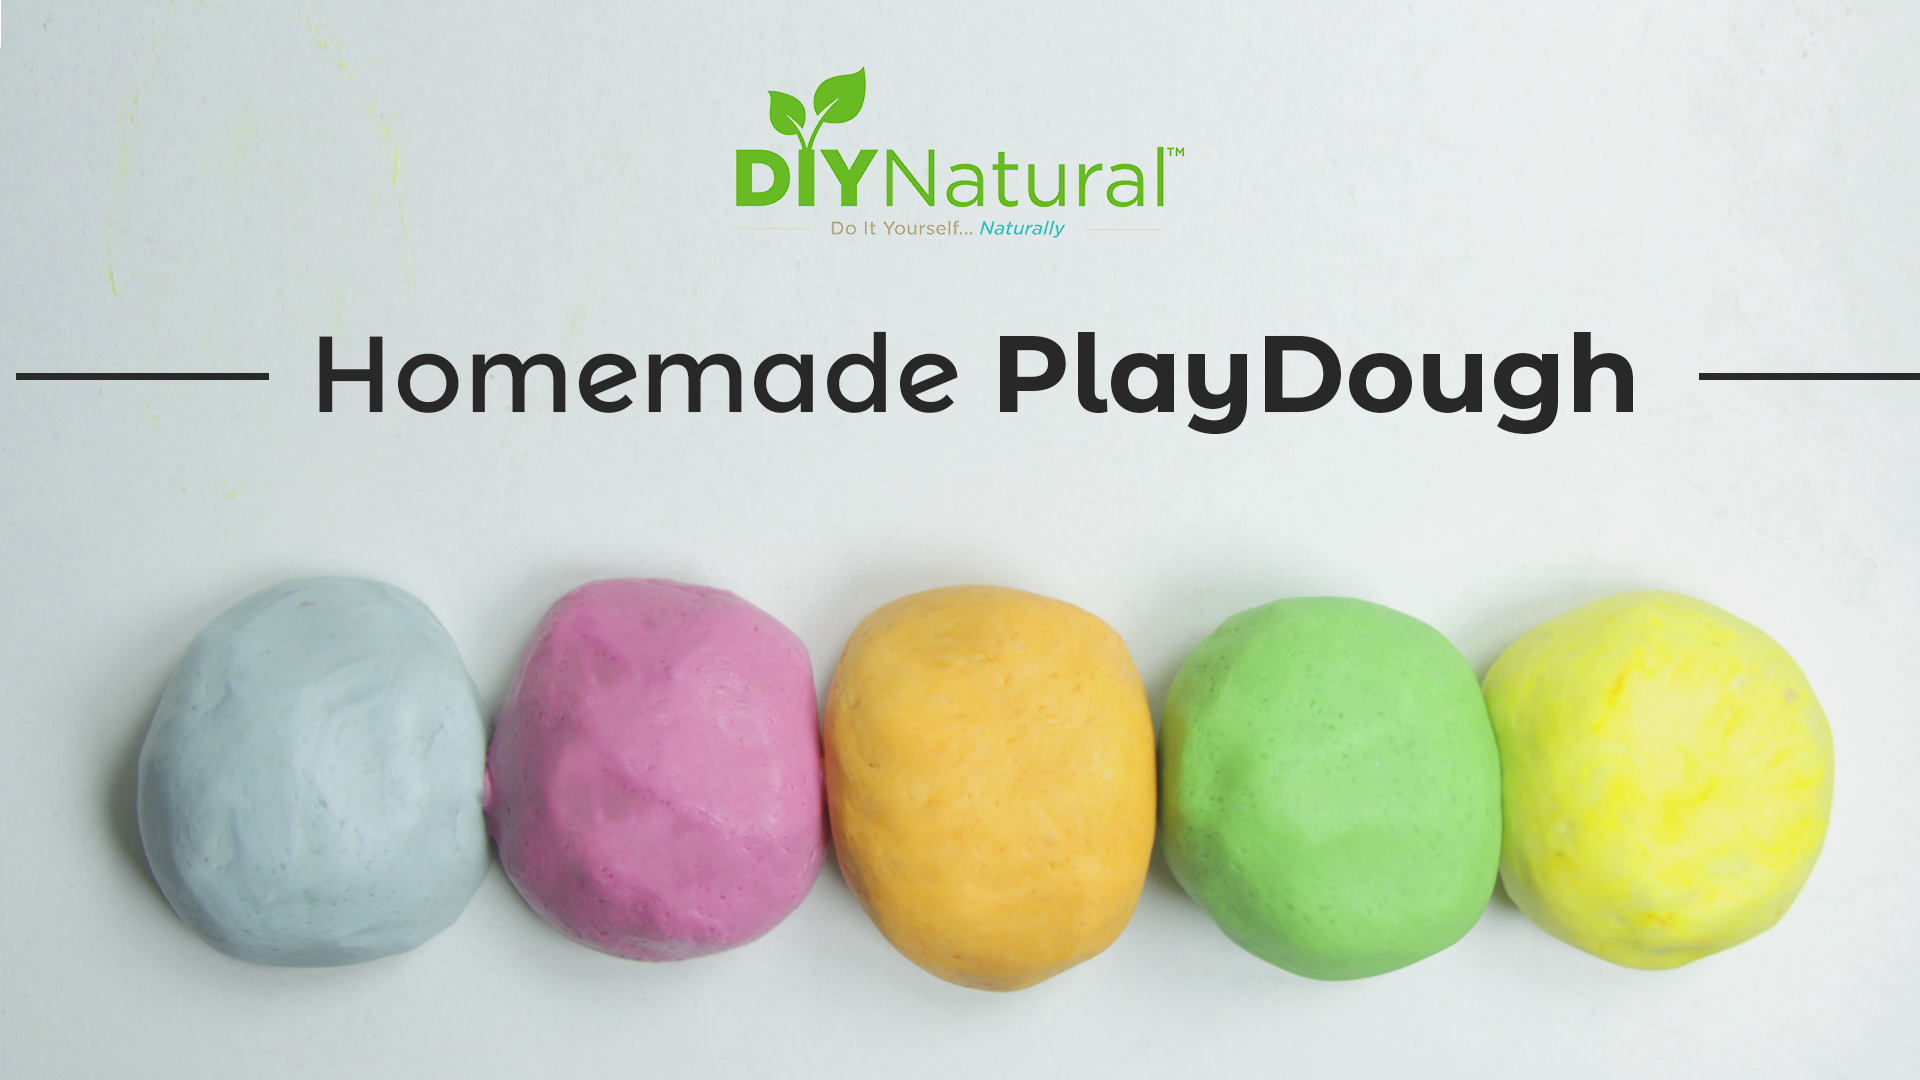 Homemade PlayDough: A Simple and Natural Recipe for You and The Kids